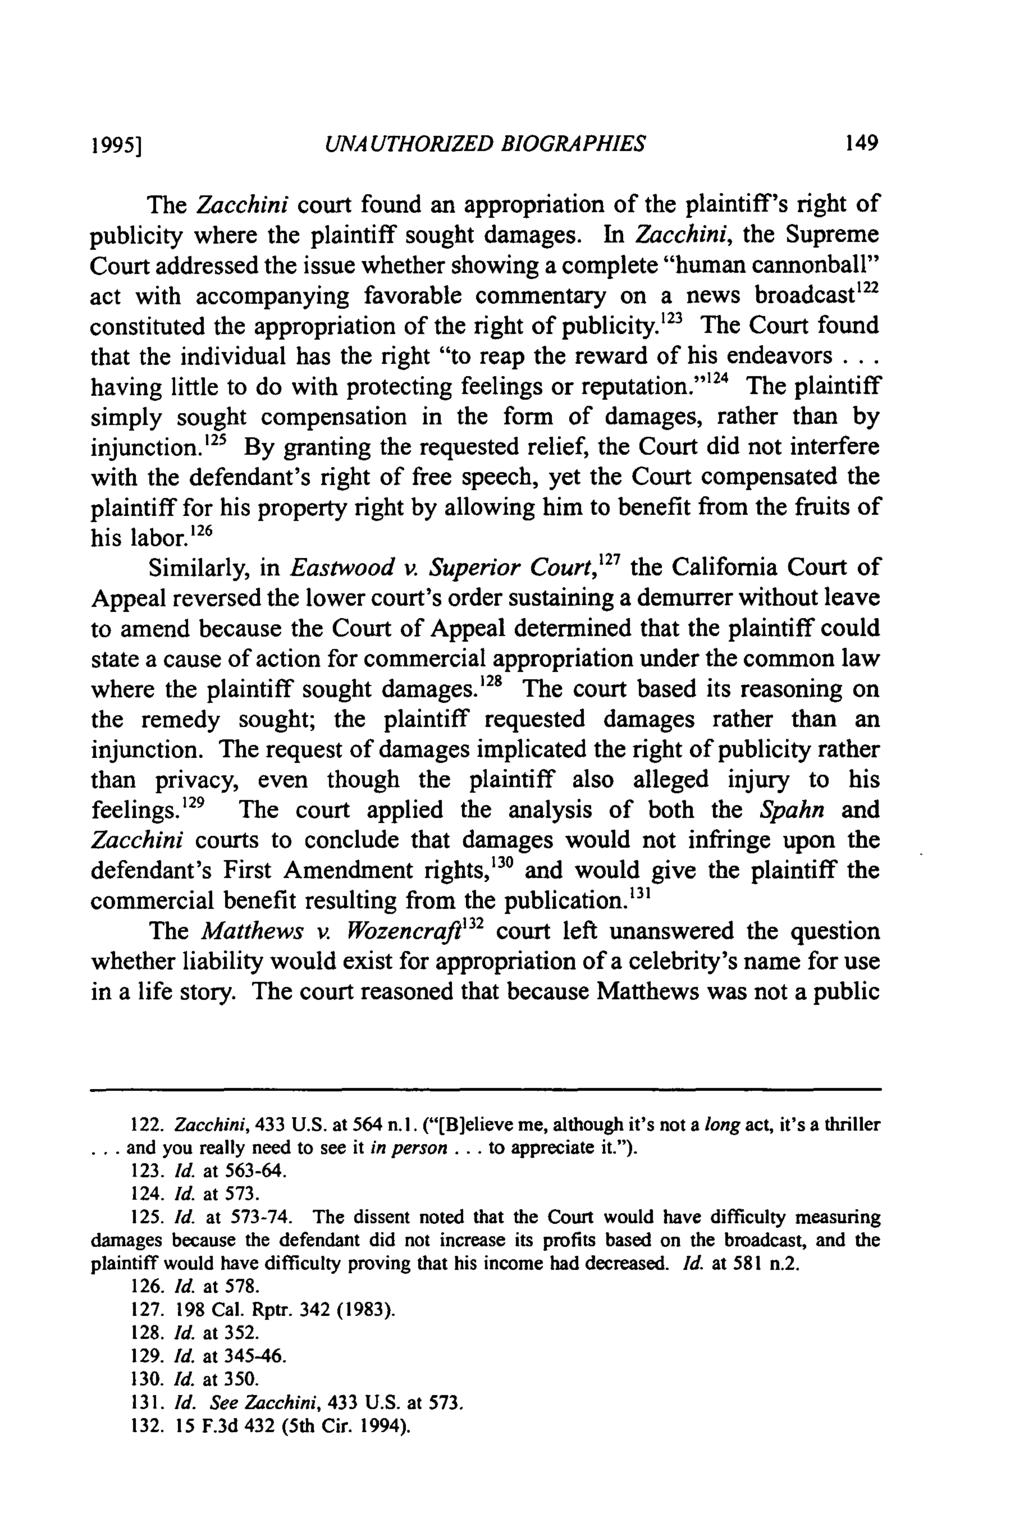 1995] UNA UTHORIZED BIOGRAPHIES The Zacchini court found an appropriation of the plaintiff's right of publicity where the plaintiff sought damages.